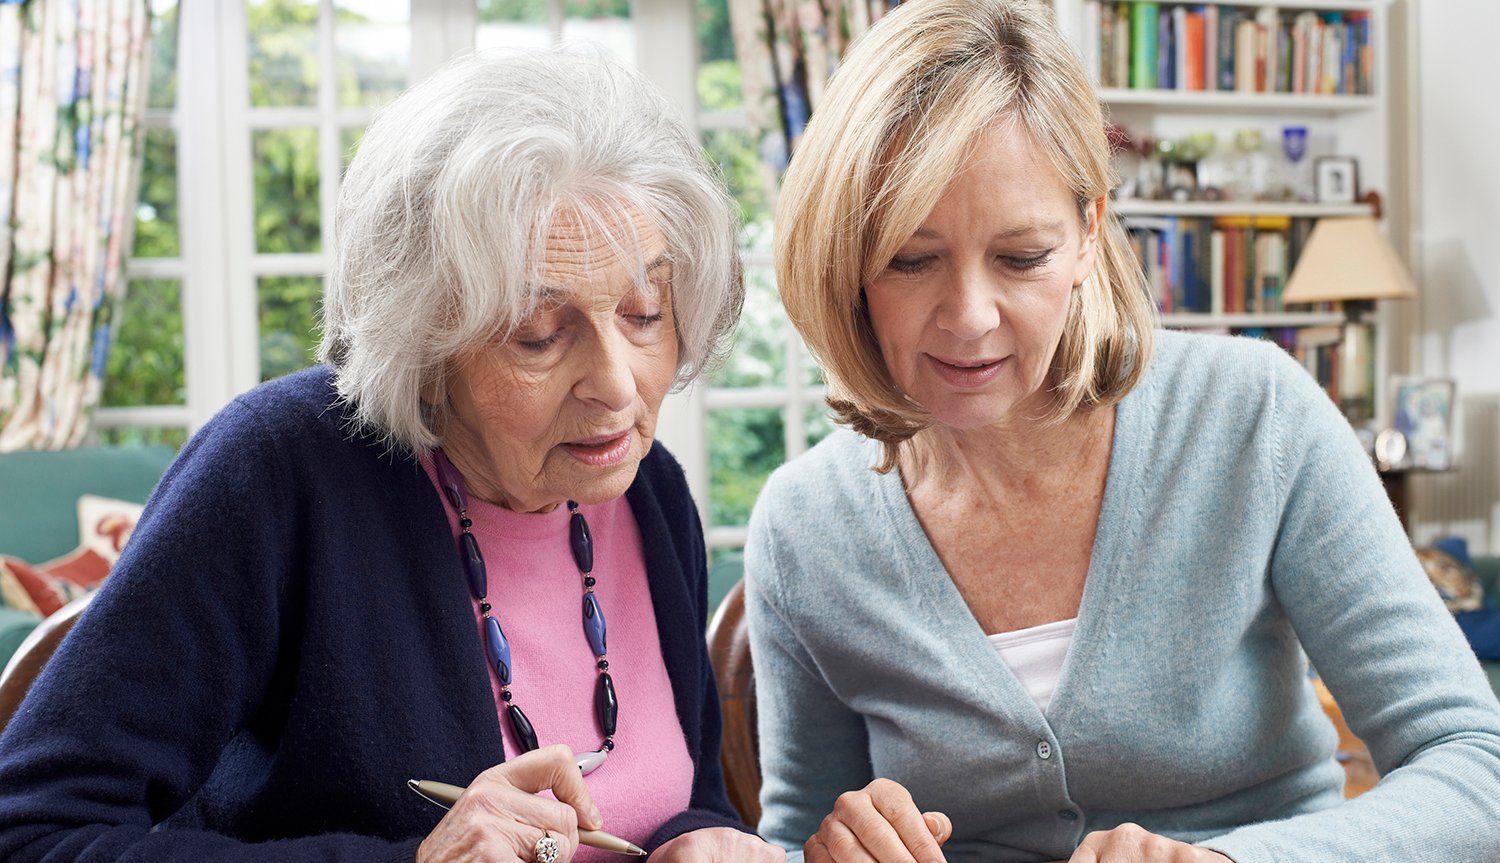 Power of Attorney helps loved ones